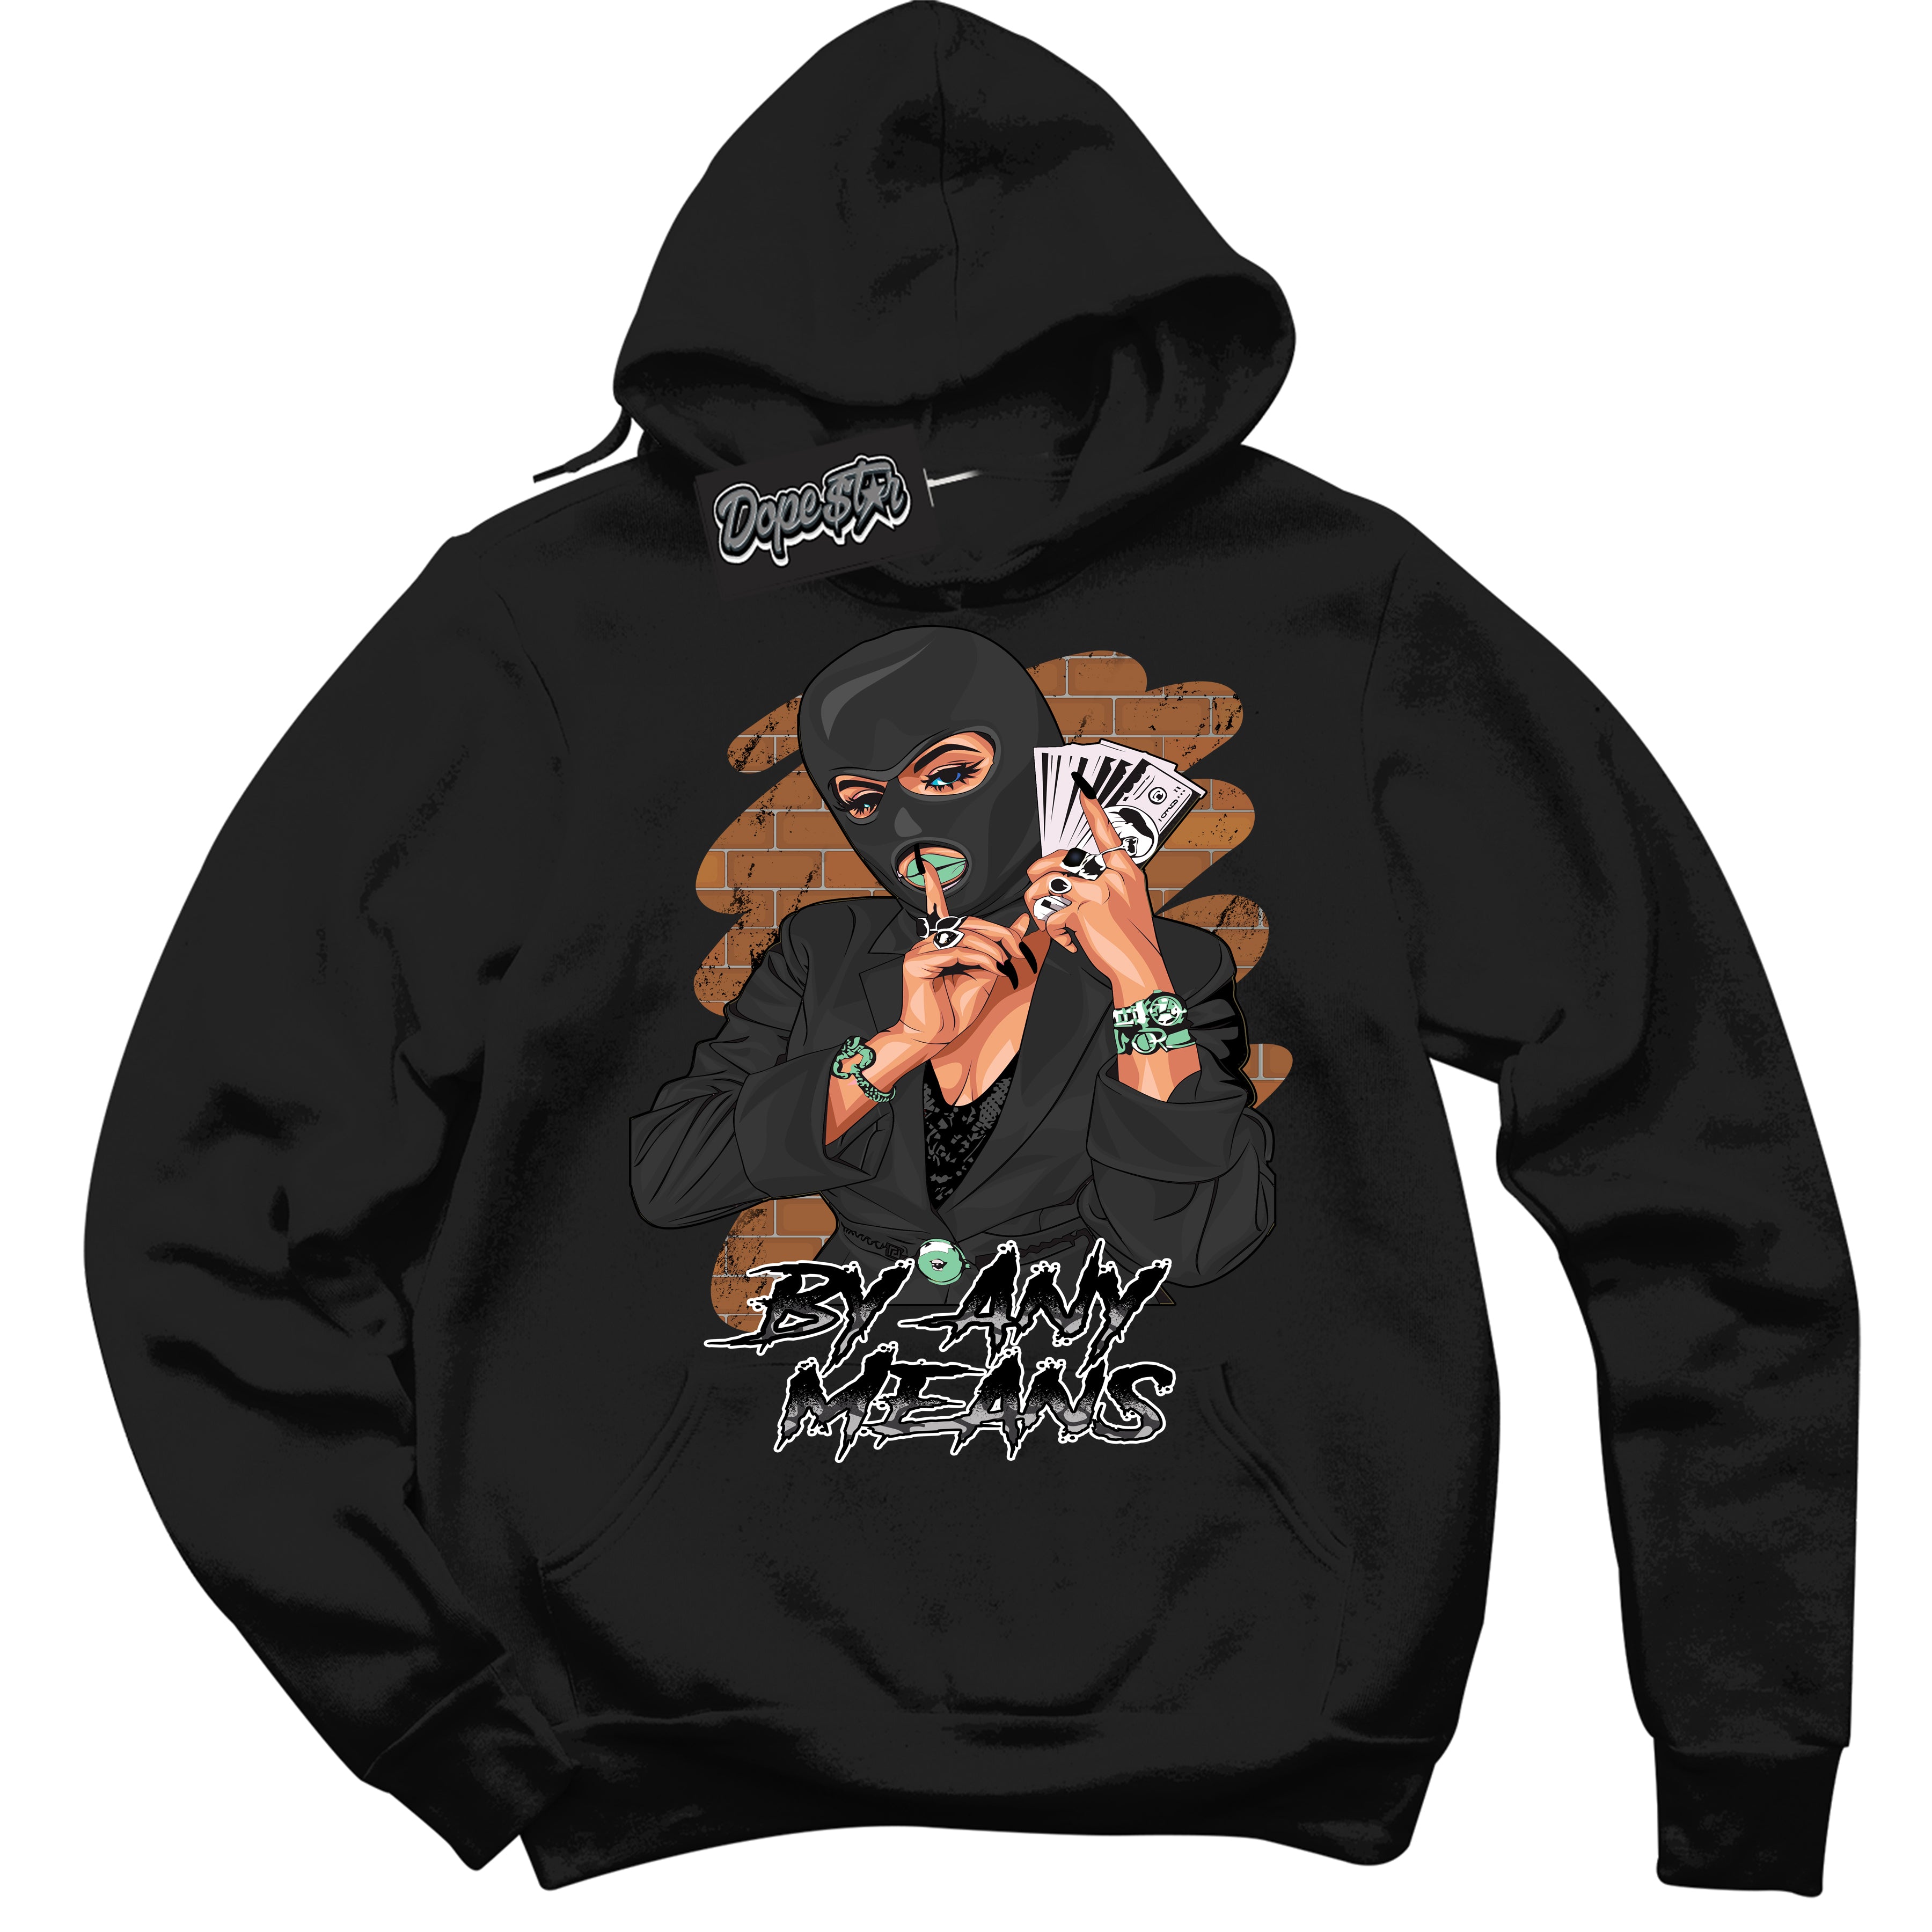 Cool Black Graphic DopeStar Hoodie with “ By Any Means “ print, that perfectly matches Green Glow 3S sneakers